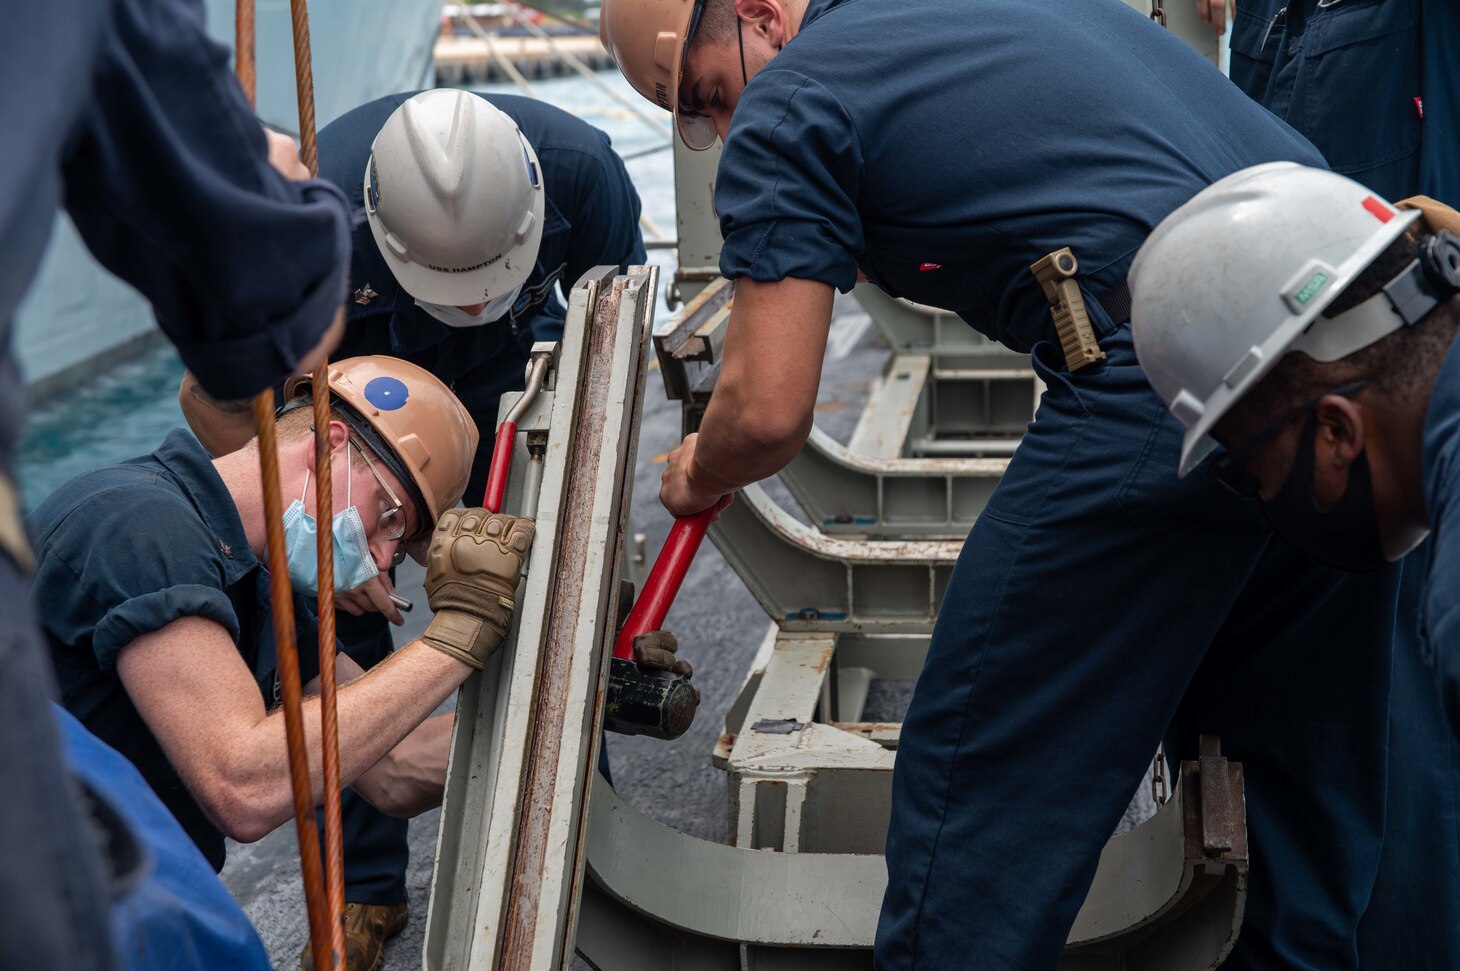 SAIPAN (Oct. 22, 2021) Torpedoman’s Mate 3rd Class Kyle Taylor of Belleville, New Jersey, left, assembles a deck skid used for loading torpedoes aboard the Los Angeles-class fast attack submarine USS Hampton (SSN 767) at the island of Saipan, Commonwealth of the Northern Mariana Islands, Oct. 22. Hampton is alongside the submarine tender USS Frank Cable (AS 40) for a weapons handling exercise involving the transfer of a MK-48 inert training shape. Frank Cable is on patrol conducting expeditionary maintenance and logistics in support of national security in the 7th Fleet area of operations. (U.S. Navy photo by Mass Communication Specialist 1st Class Charlotte C. Oliver)